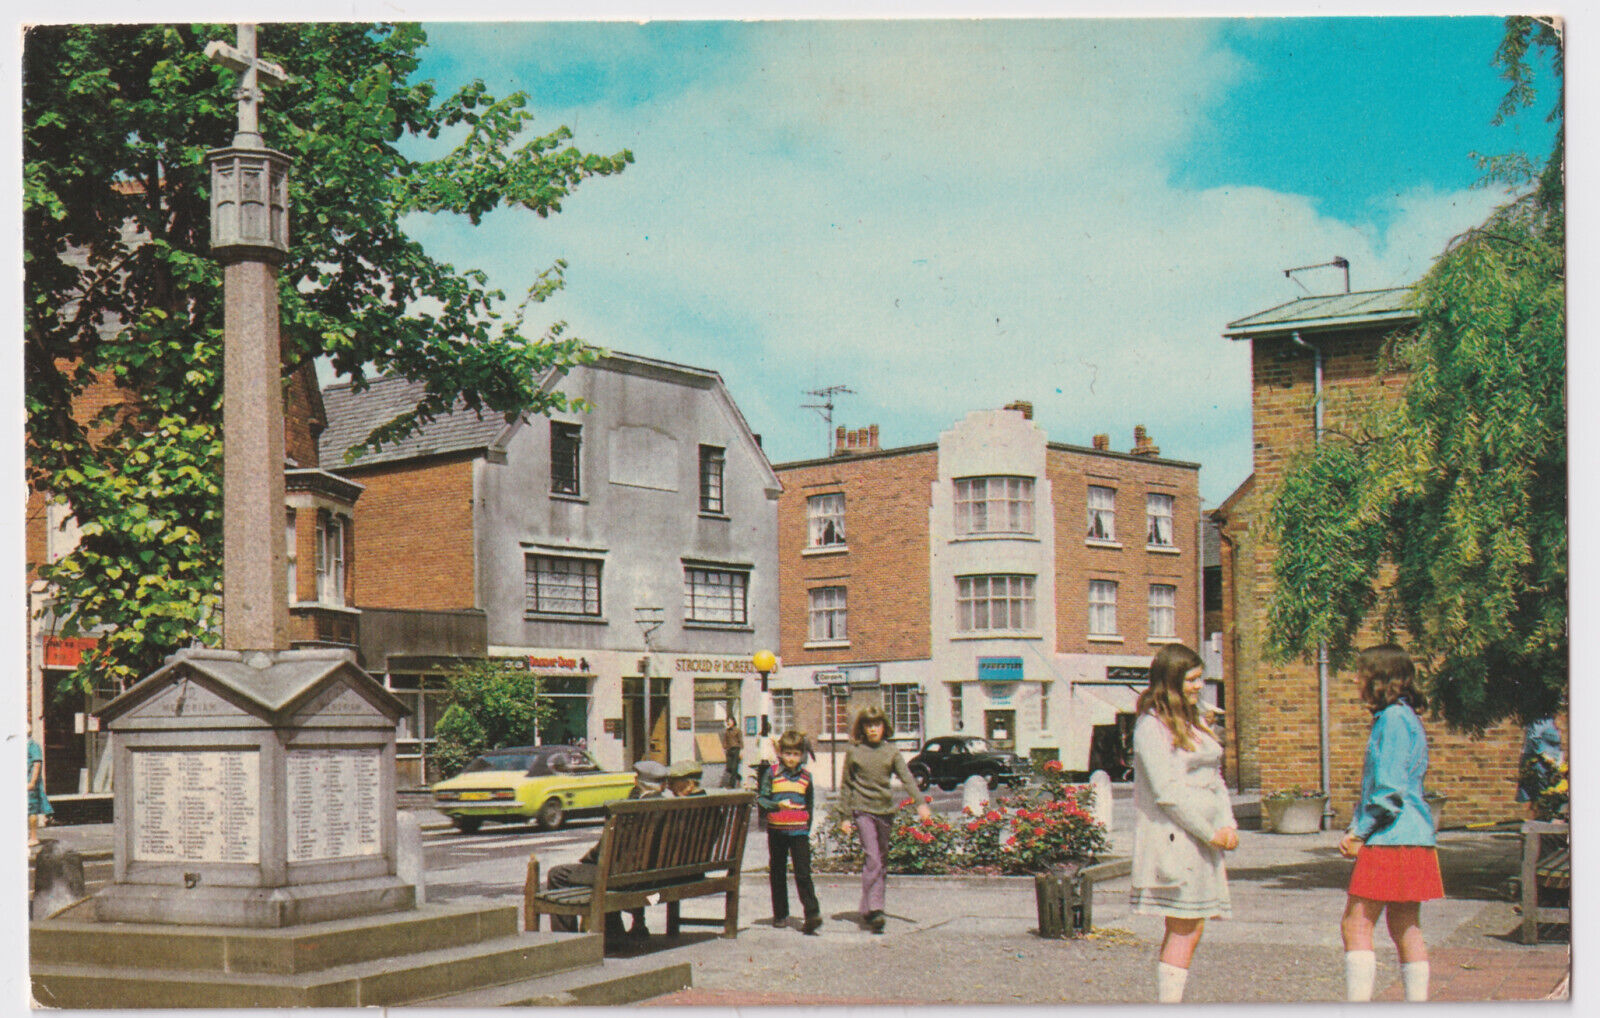 UK KENT WHITSTABLE TOWN CENTRE POSTCARD PUBLISHED BY COLOURMASTER CIRCA 1965.